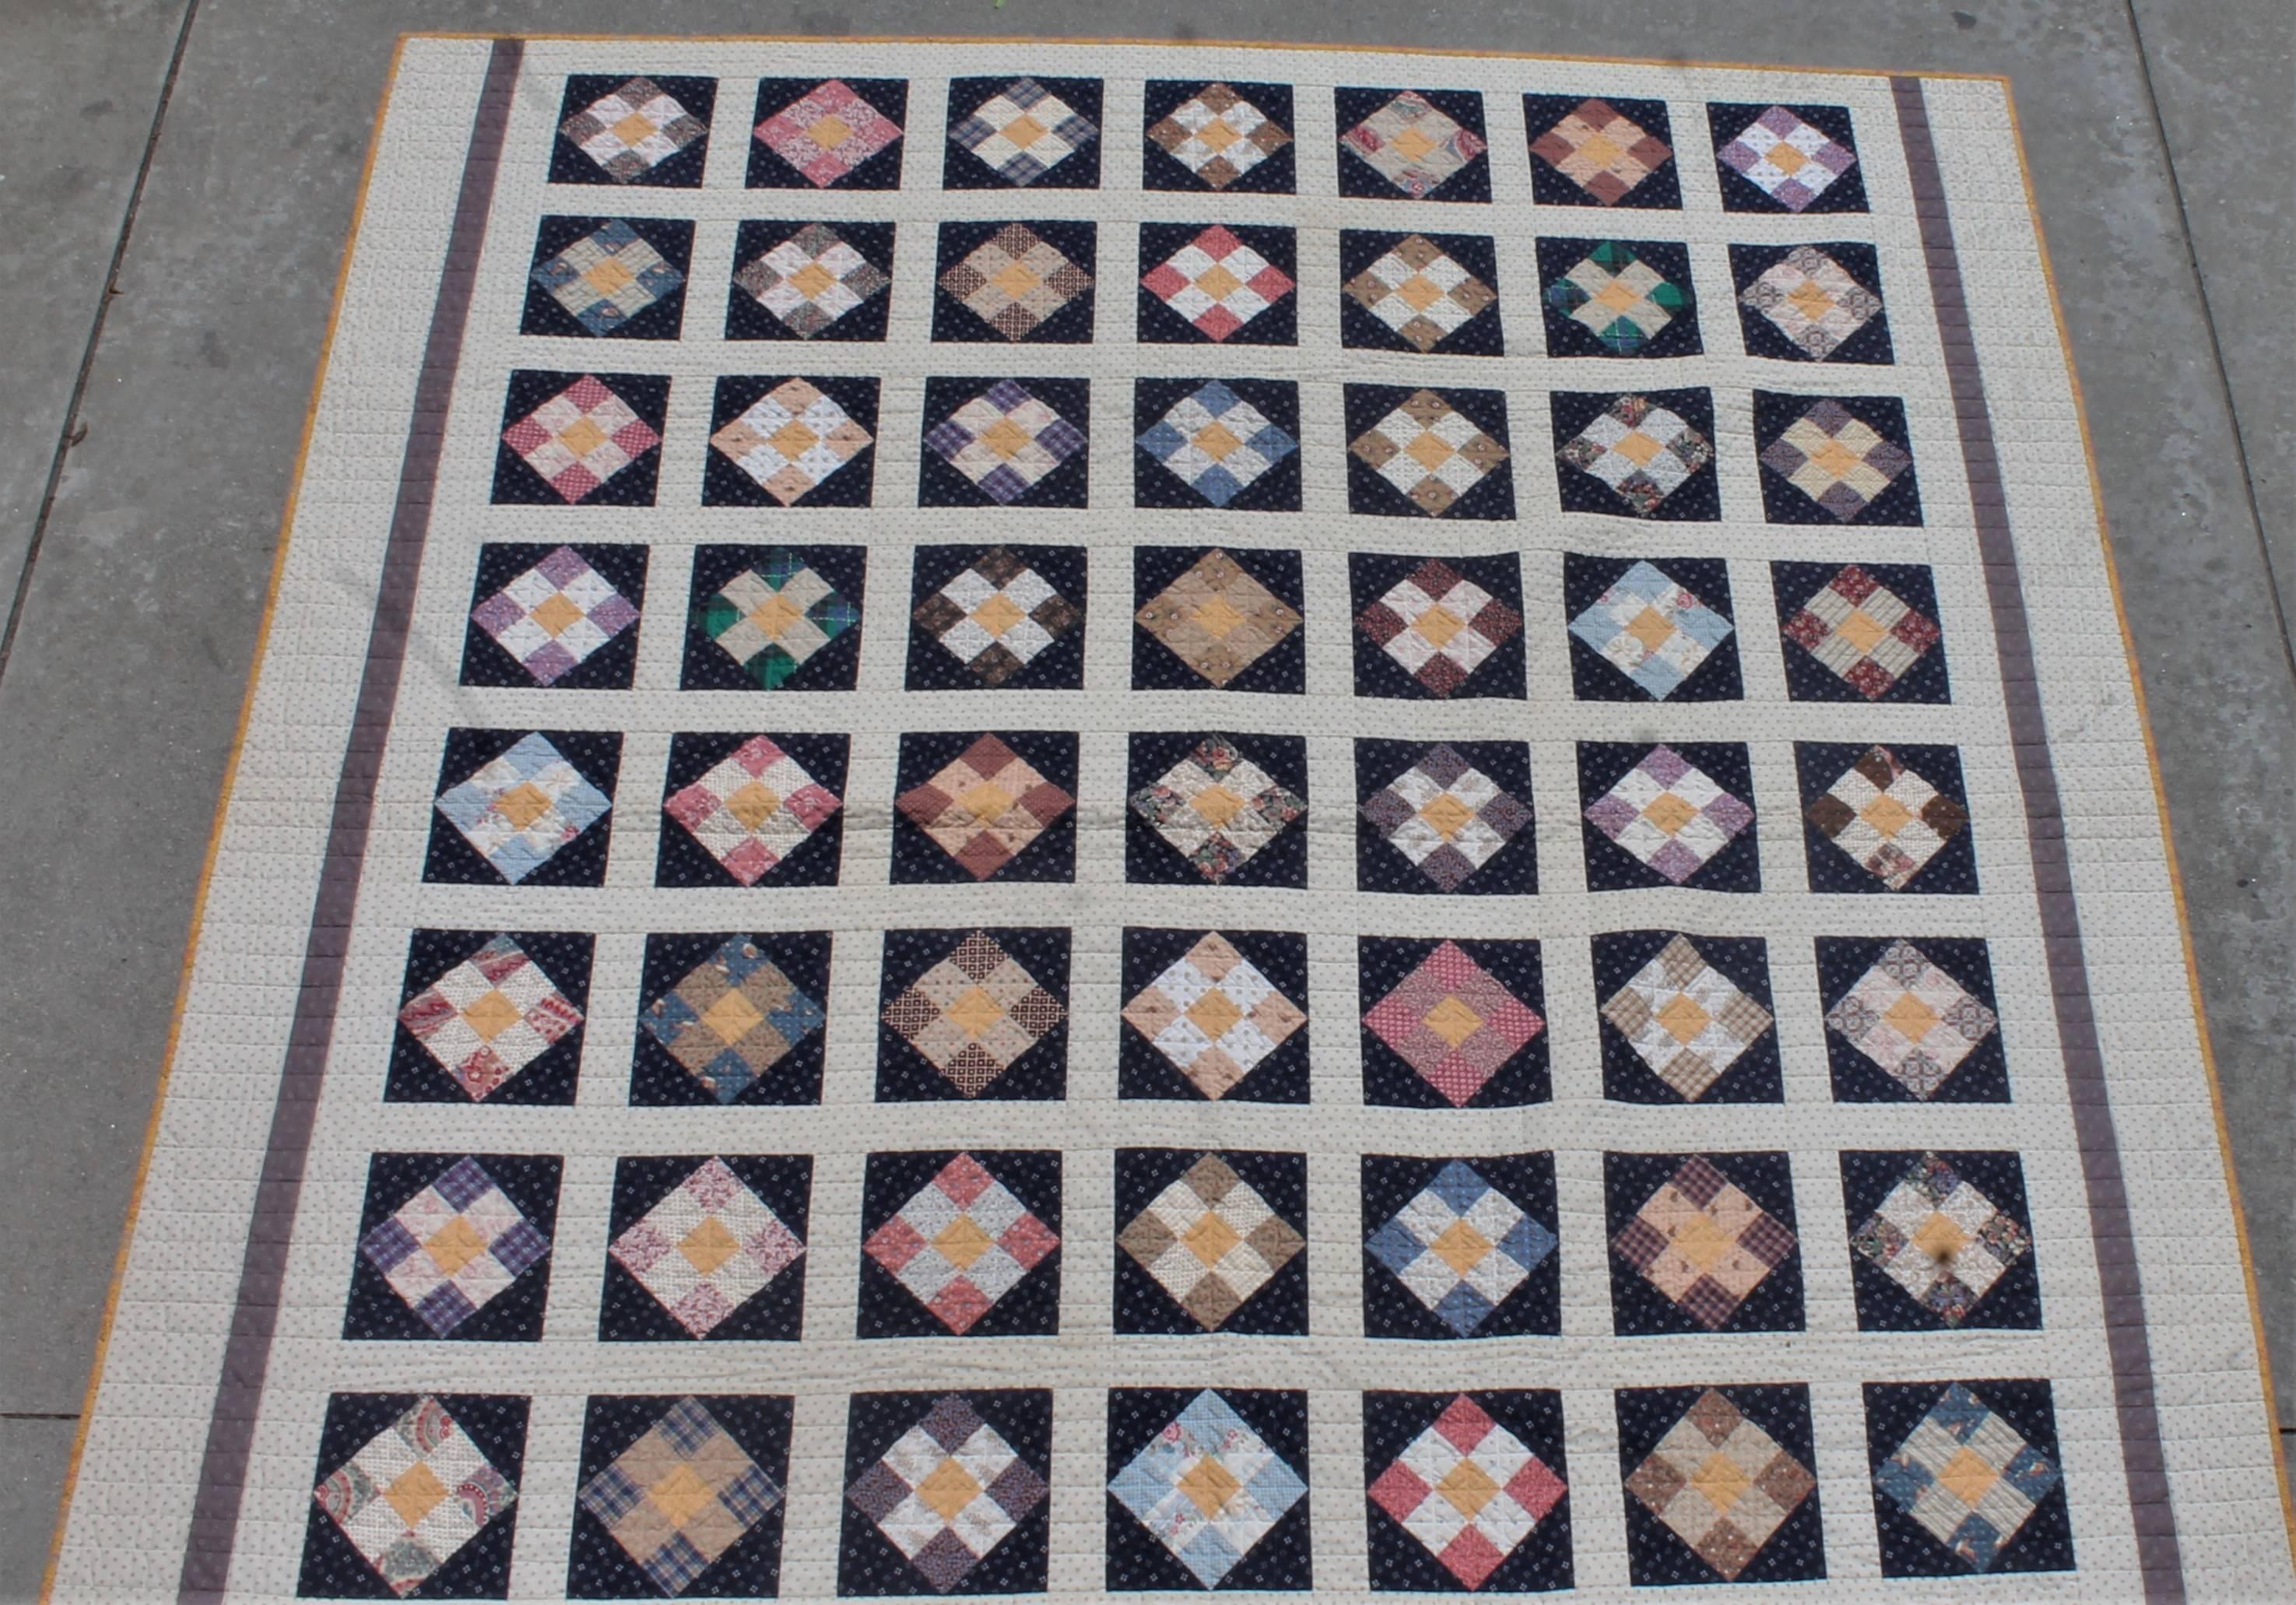 This fine early fabric example of a sampler nine patch quilt is in very good condition. It has hand pieced pieces and has treadle machine over throughout the quilt. This was done to keep the condition strong and great! These bars of nine patch's